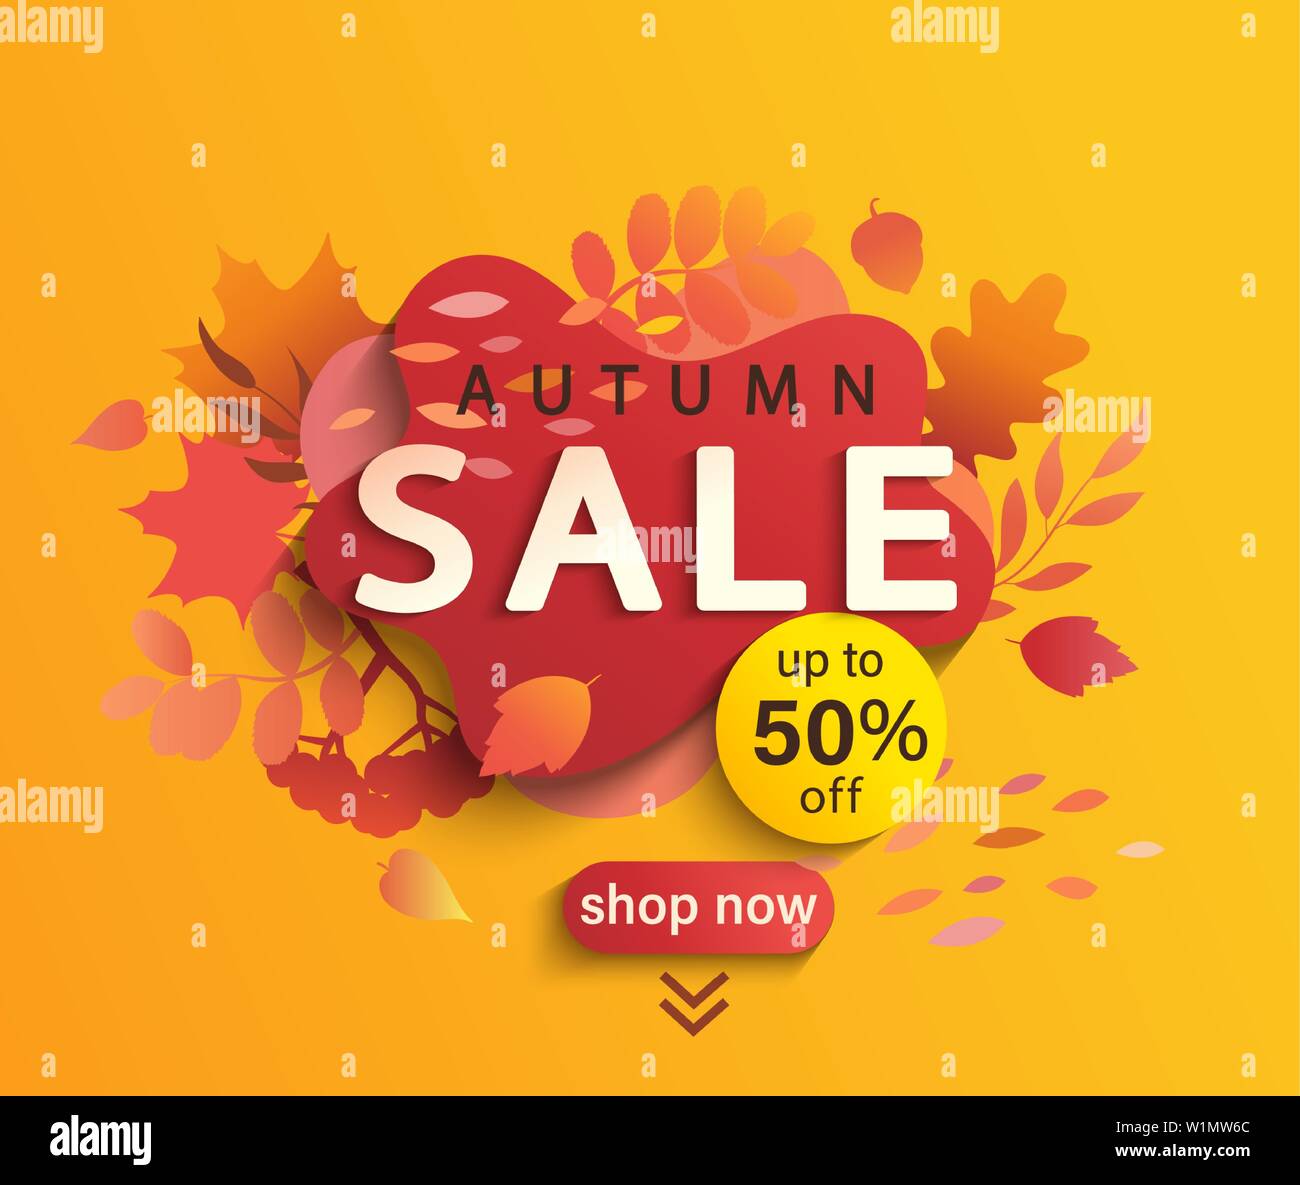 Autumn sale banner, fall season discount poster with falling leaves and shadow of rowan and acorn, 50 percent price off for shopping promotions,prints Stock Vector